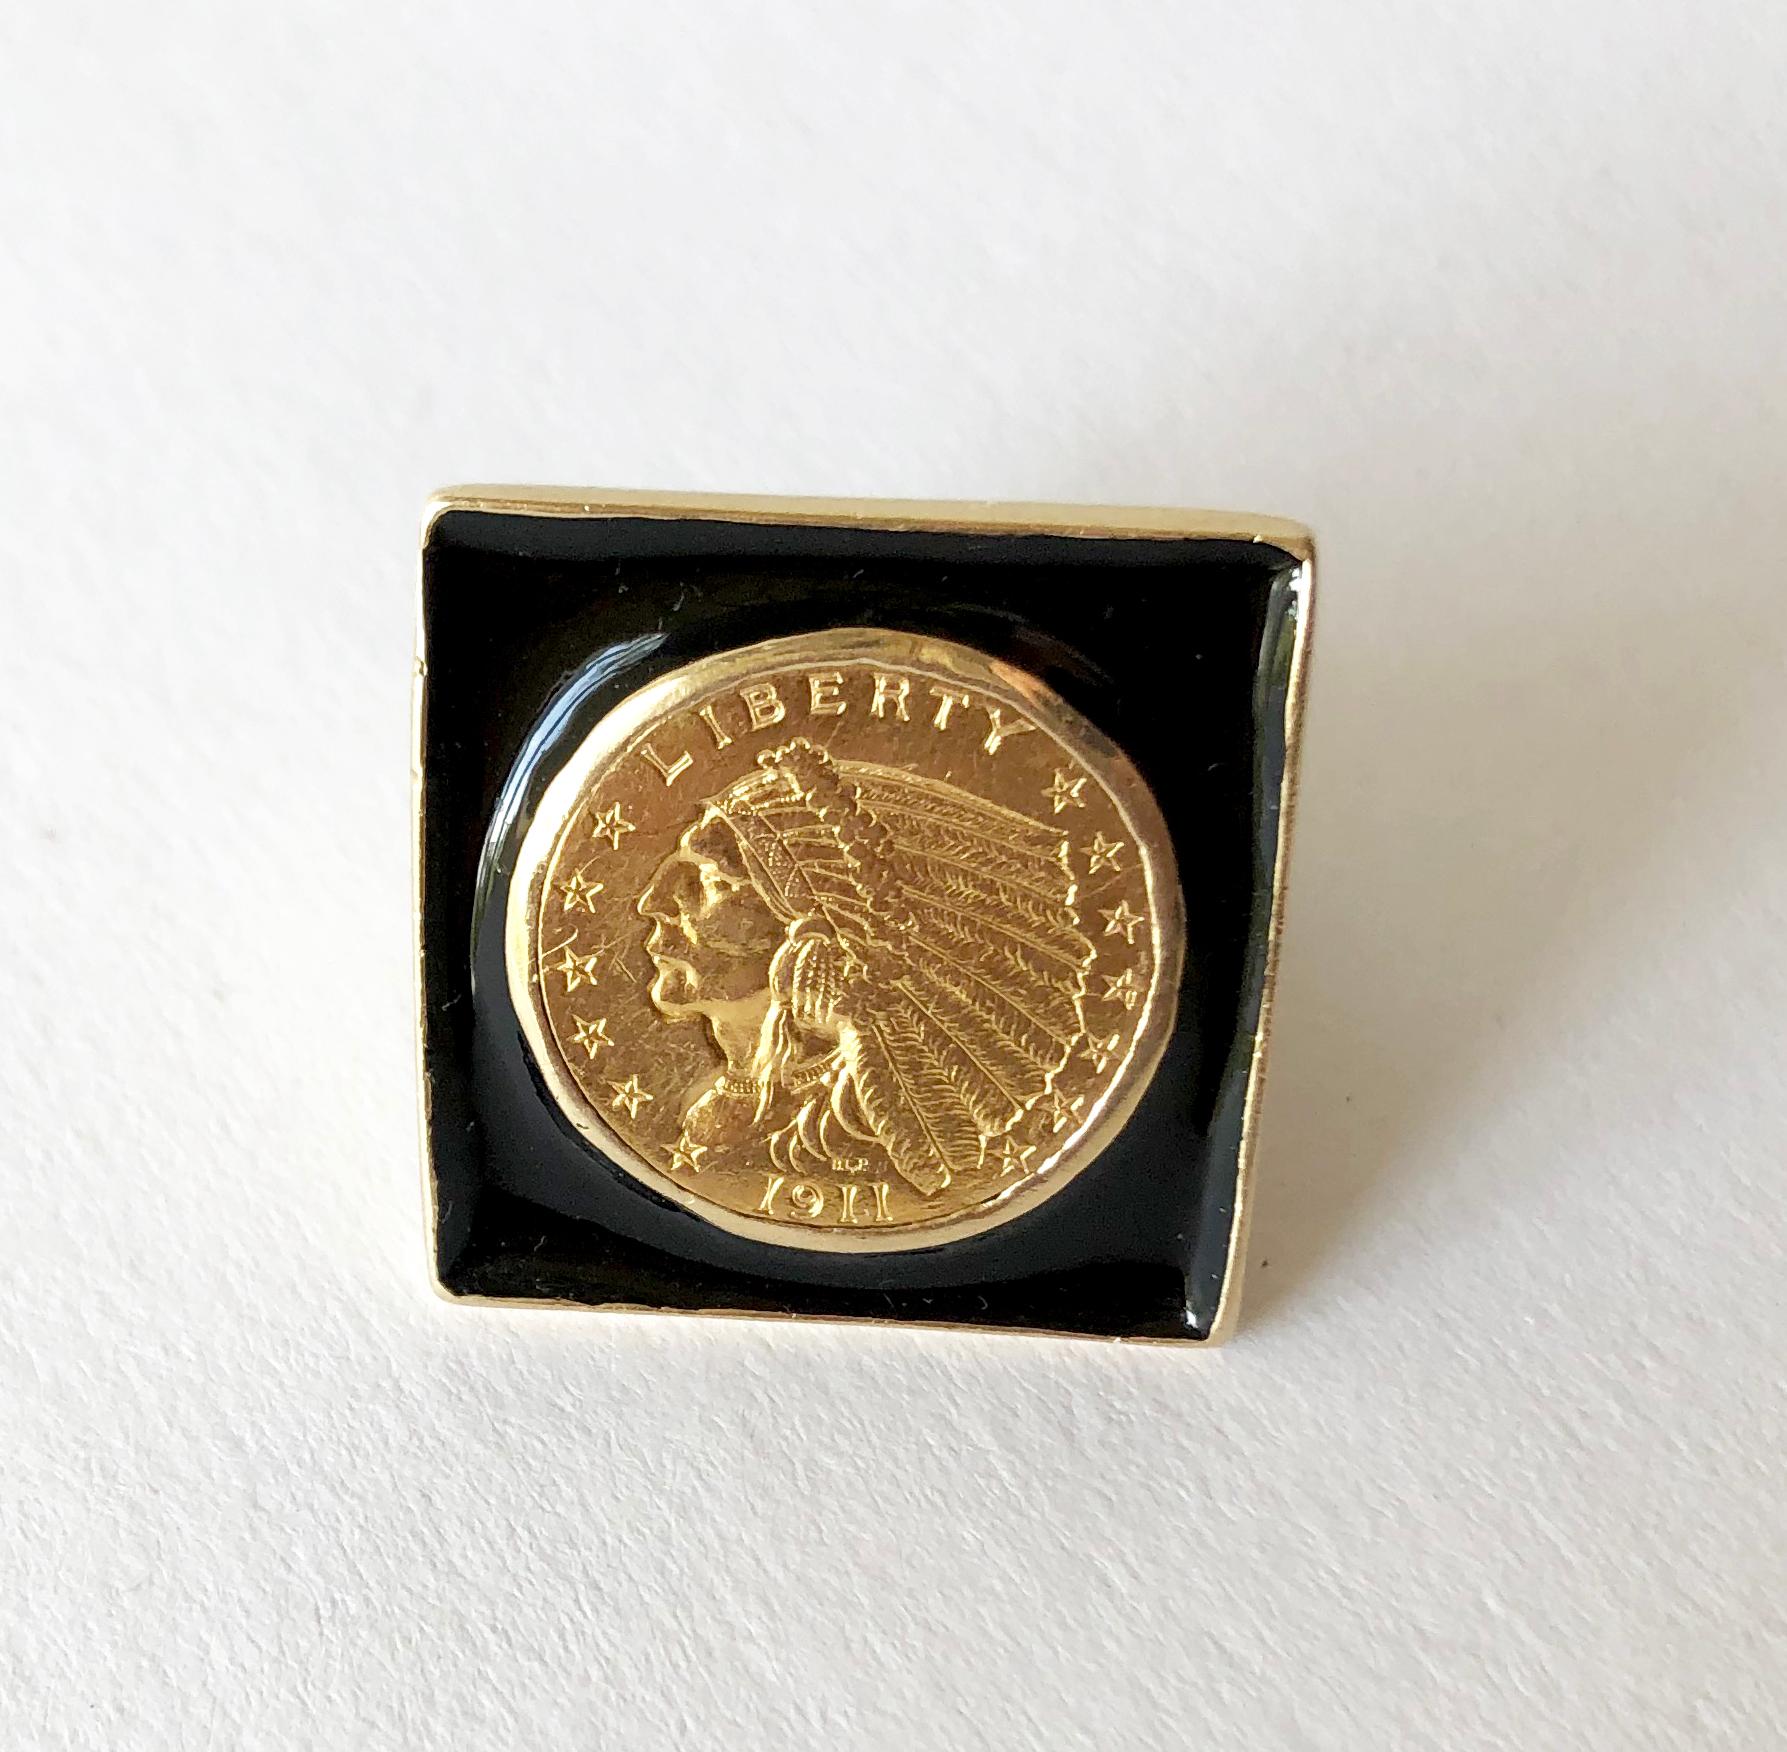 Large scale 1911 Indian head quarter eagle gold coin and enamel ring, circa 1960's.  Coin has 90% gold content, while the ring bezel and shank tests as 14K gold.  Ring is a finger size 8 to 8.5 and the face measures 1